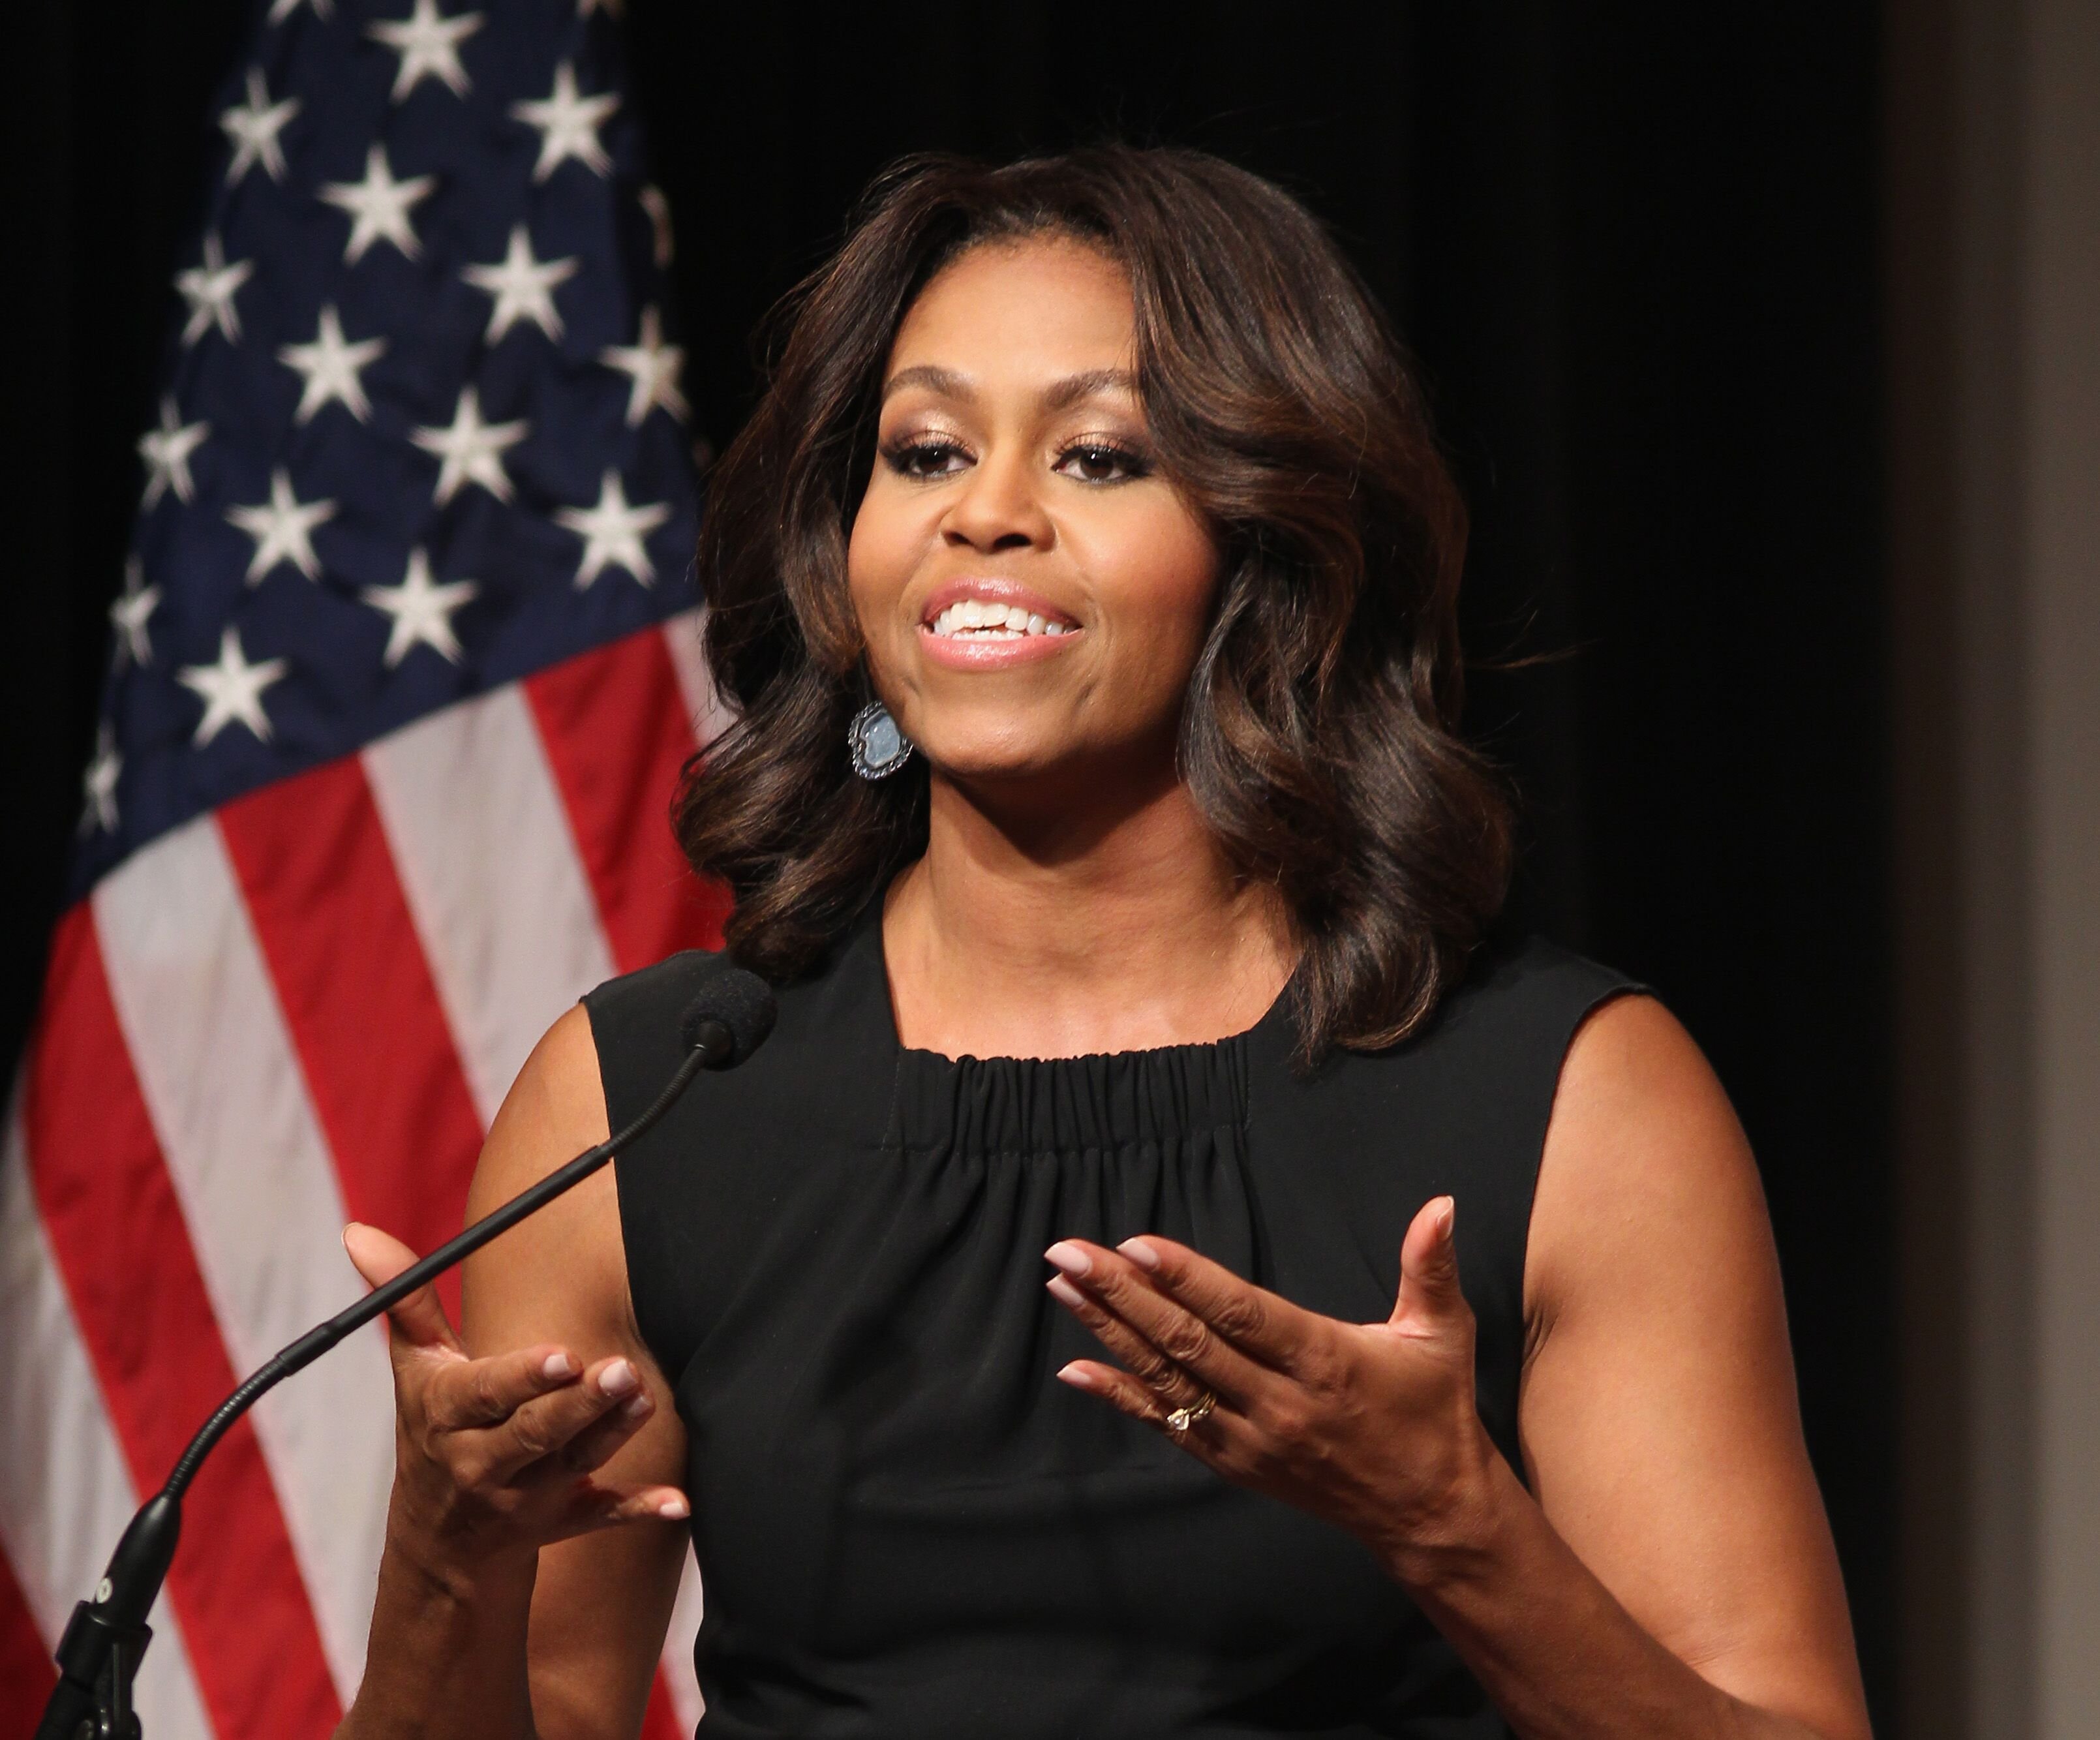 The former First Lady of the United States Michelle Obama speaks on stage at the Women Veterans Career Development Forum at Women in Military Service for America Memorial on November 10, 2014 | Photo: Getty Images